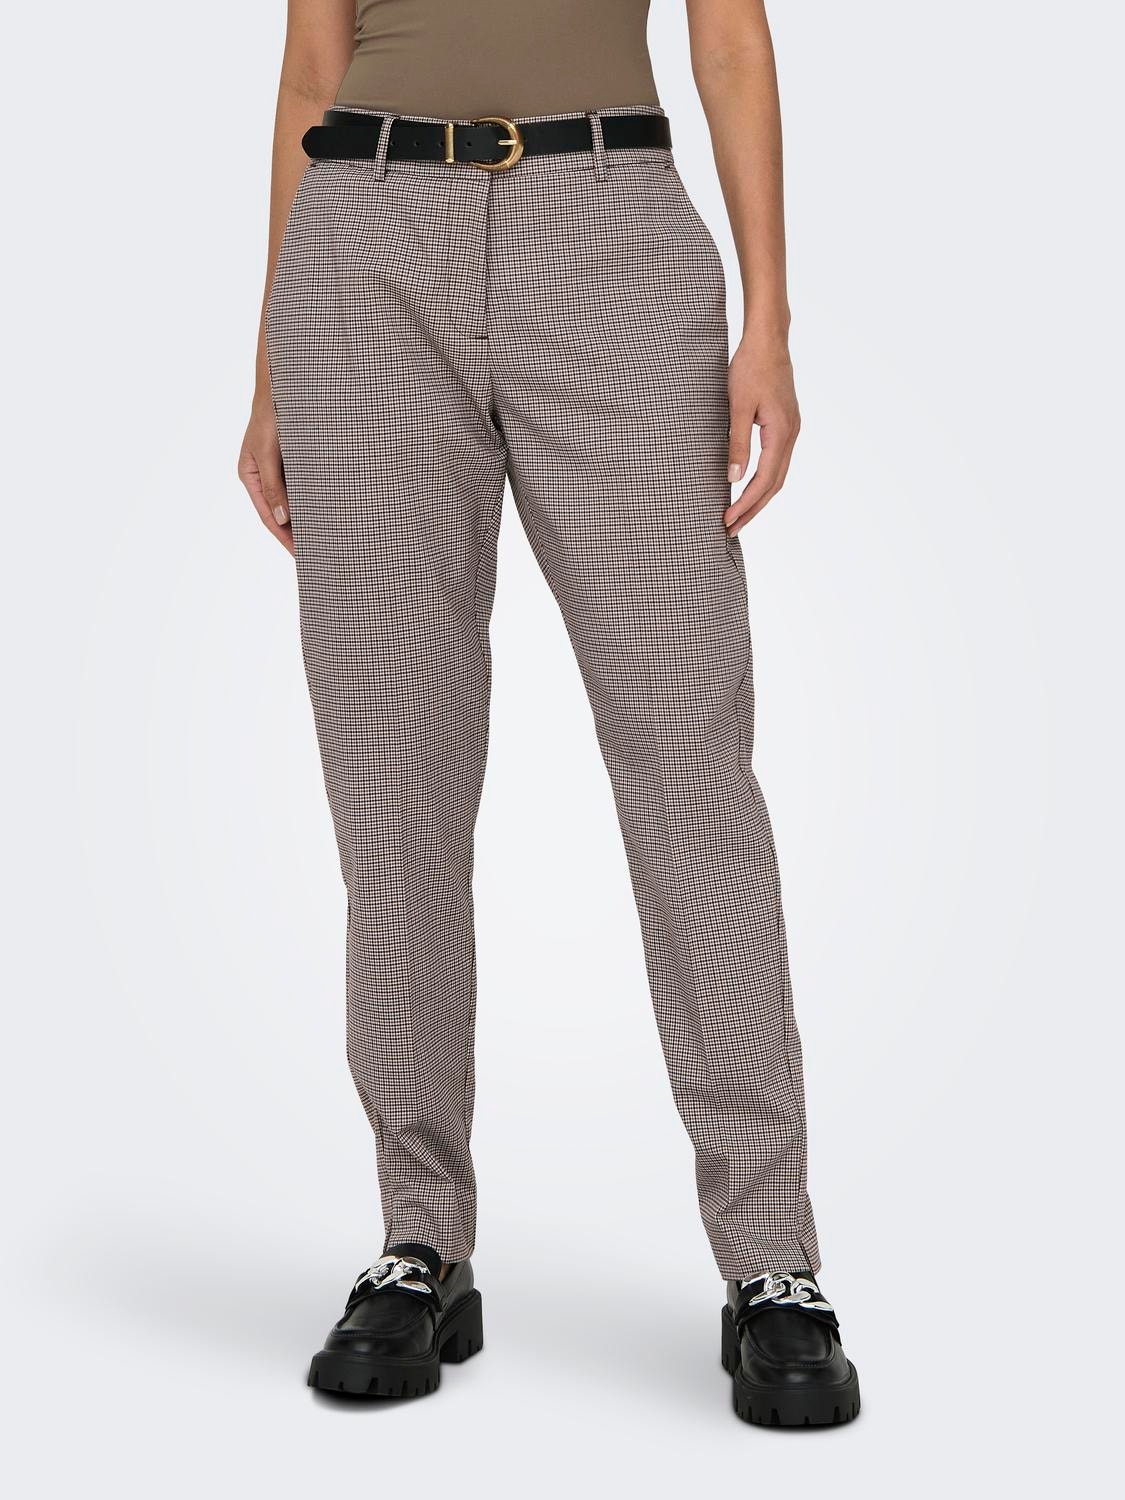 ONLY Trousers with high waist -Pumice Stone - 15313686